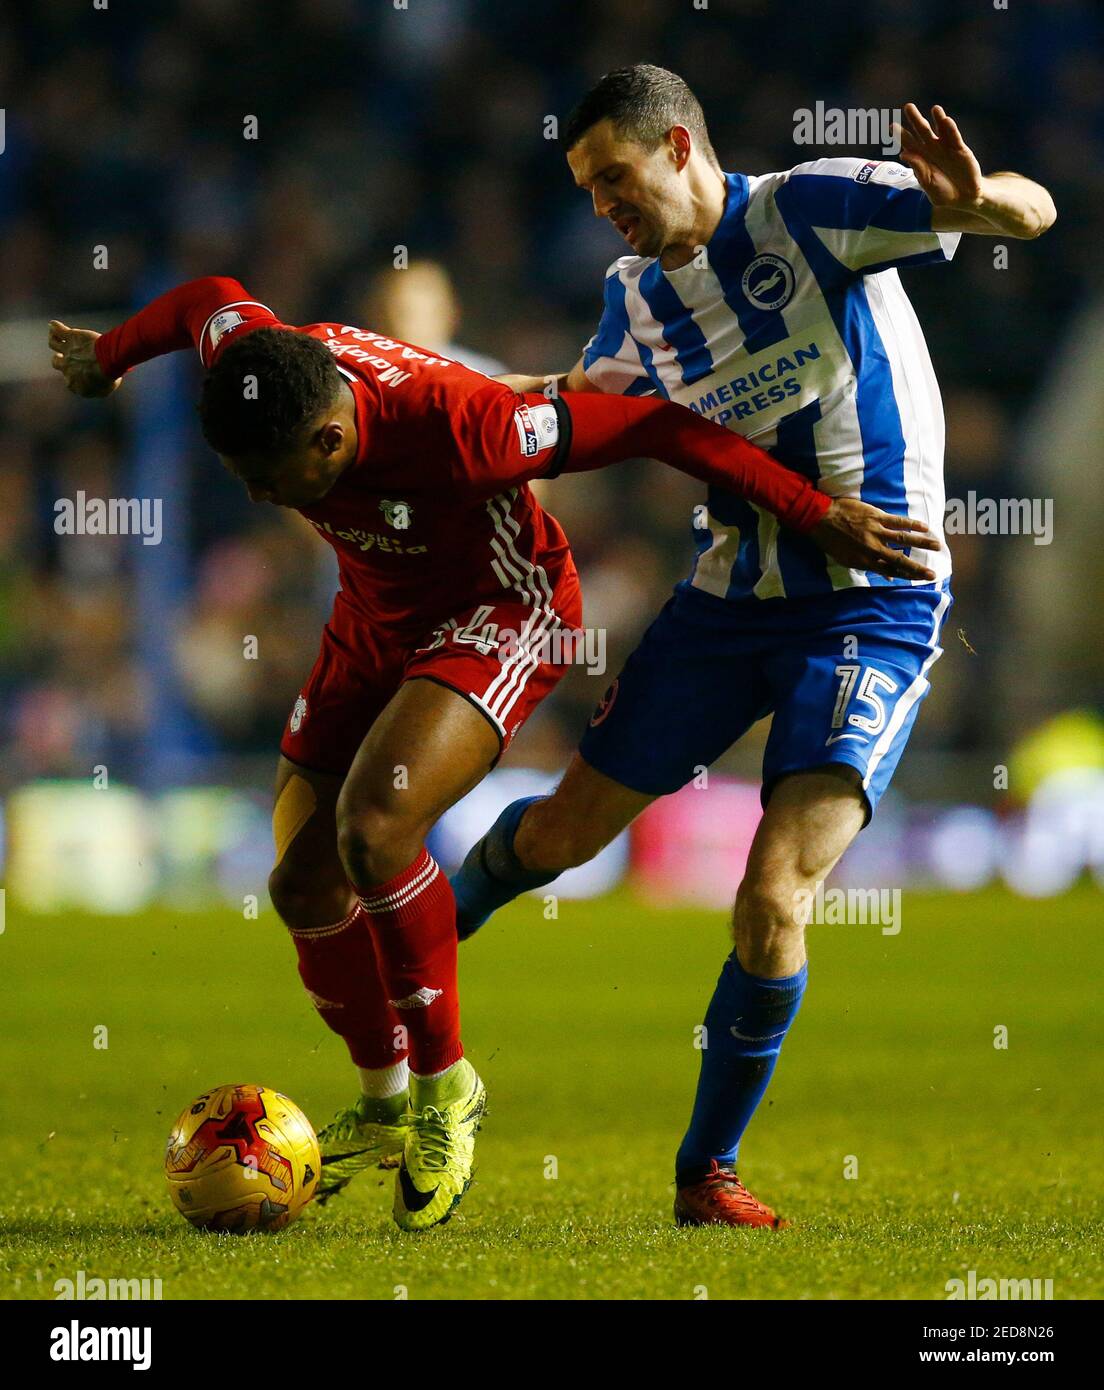 Britain Football Soccer - Brighton & Hove Albion v Cardiff City - Sky Bet Championship - The American Express Community Stadium - 24/1/17 Cardiff City's Kadeem Harris in action with Brighton's Jamie Murphy  Mandatory Credit: Action Images / Peter Cziborra Livepic EDITORIAL USE ONLY. No use with unauthorized audio, video, data, fixture lists, club/league logos or 'live' services. Online in-match use limited to 45 images, no video emulation. No use in betting, games or single club/league/player publications.  Please contact your account representative for further details. Stock Photo